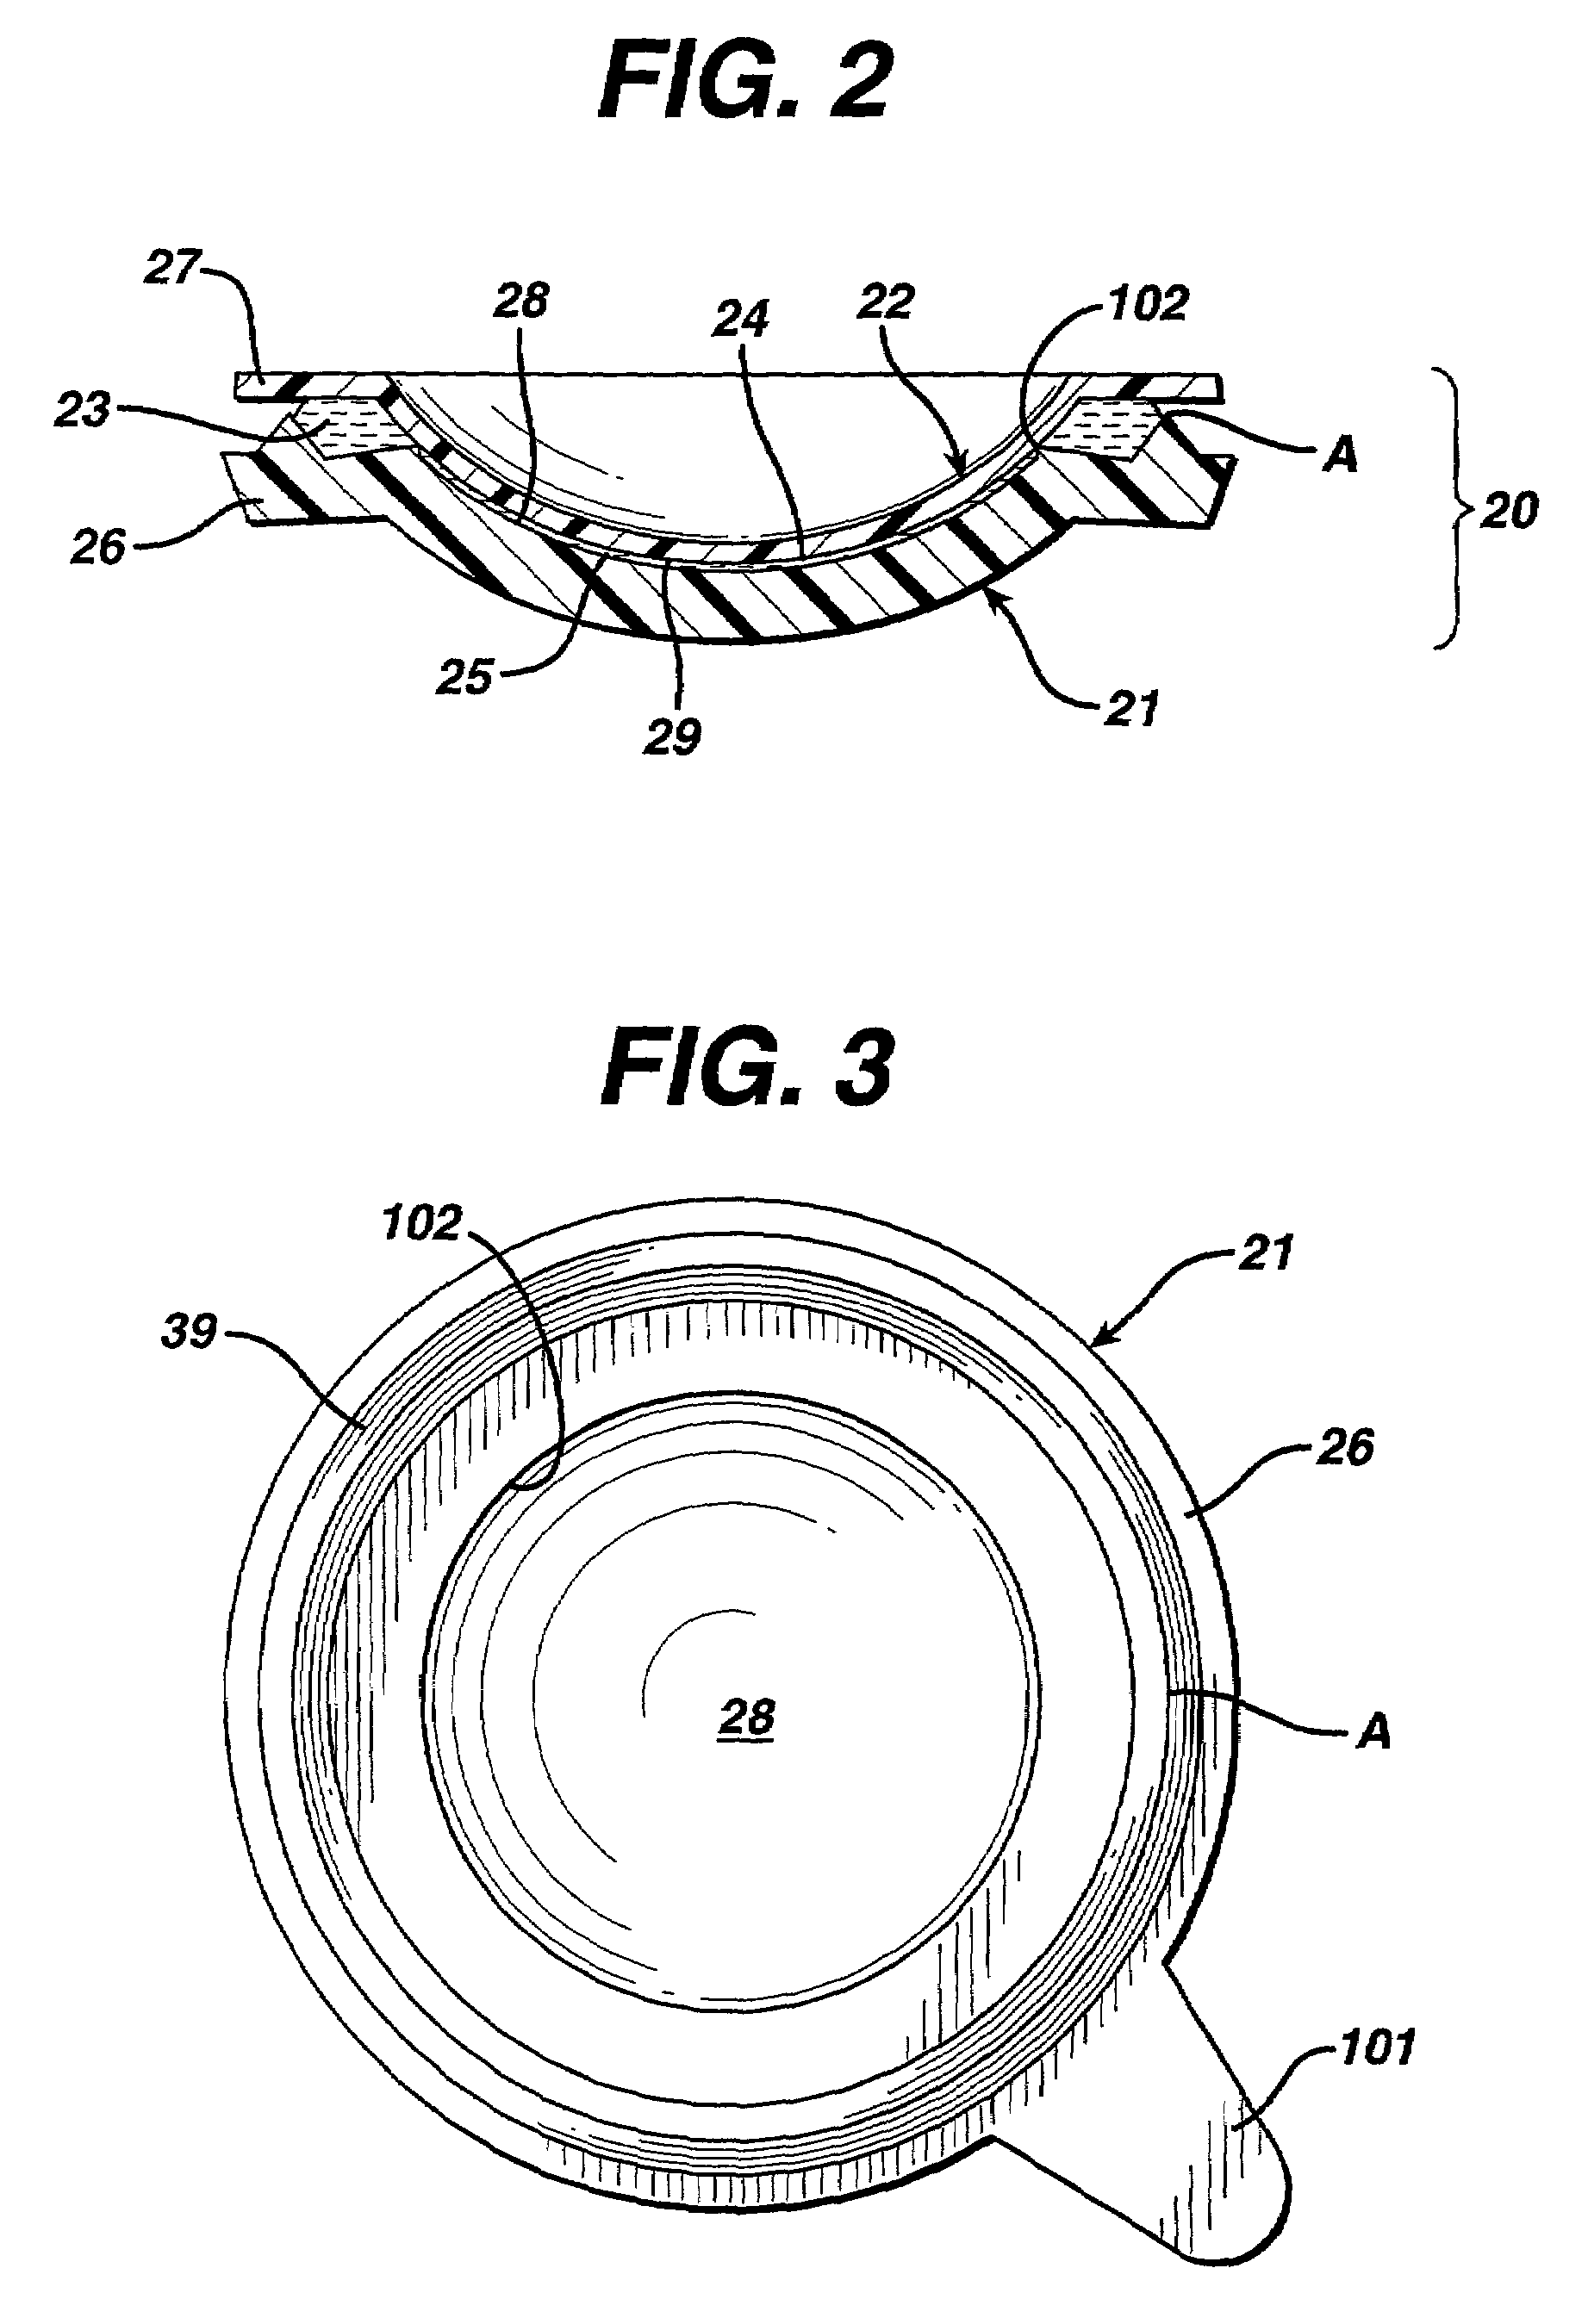 Mold for forming a contact lens and method of preventing formation of small strands of contact lens material during contact lens manufacture